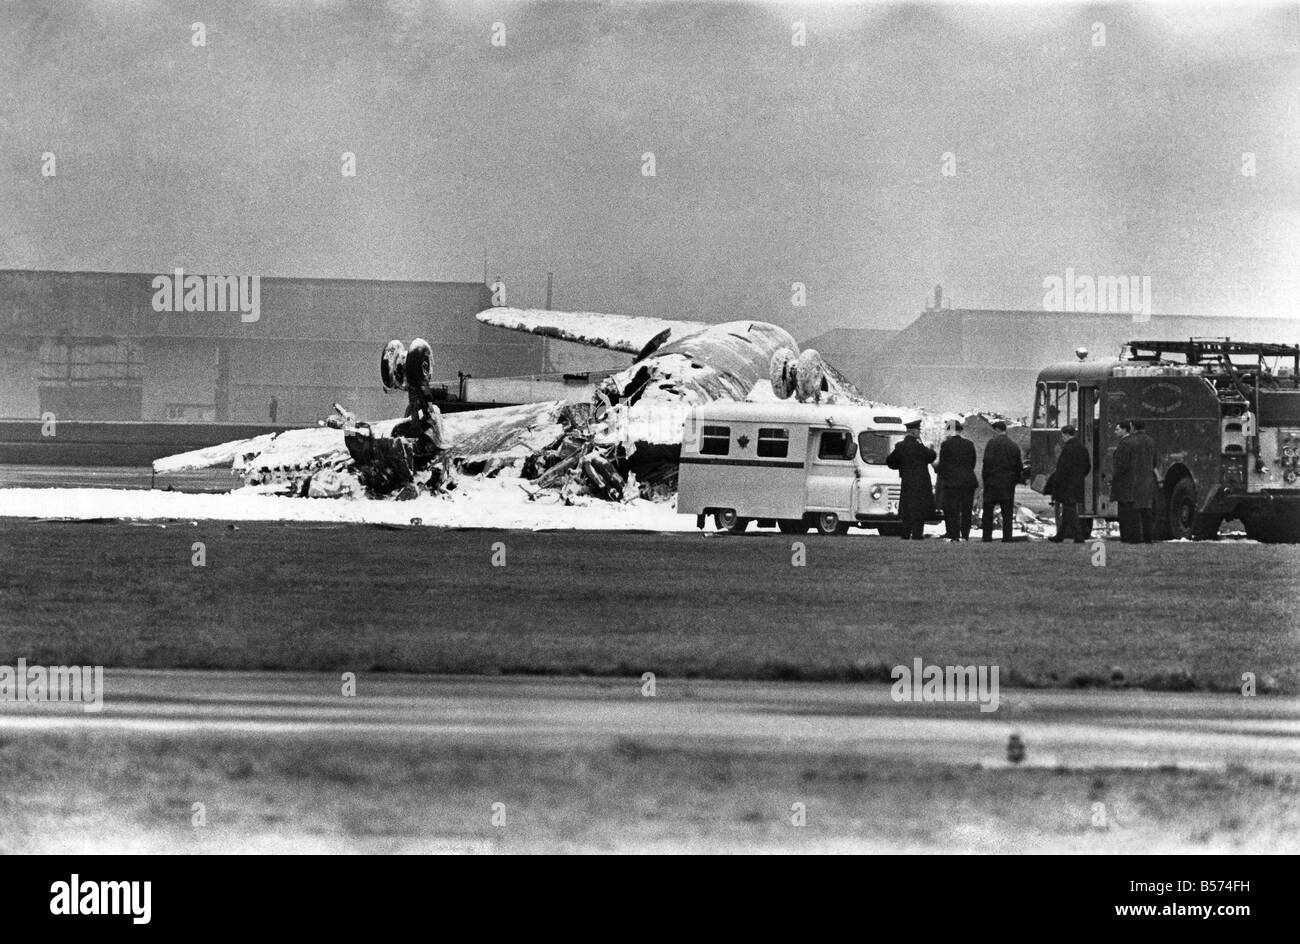 Accidents - Air: Hostess Jane lives as plane dives to disaster: An air hostess staggered into the arms of rescuers on Thursday (20-3-69) after walking out of the blazing wreckage of an airliner. She was the sole survivor of the plane's crew of four. The airliner, a Viscount belonging to British Midland Airways, Plunged into a runway at Manchester Airport, Lancashire, seconds after taking off on a routine training flight. One of the rescuers said that the hostess, Jane Timson, "walked towards us as we raced up the runway, and didn't appear badly hurt." March 1969 P04402 Stock Photo